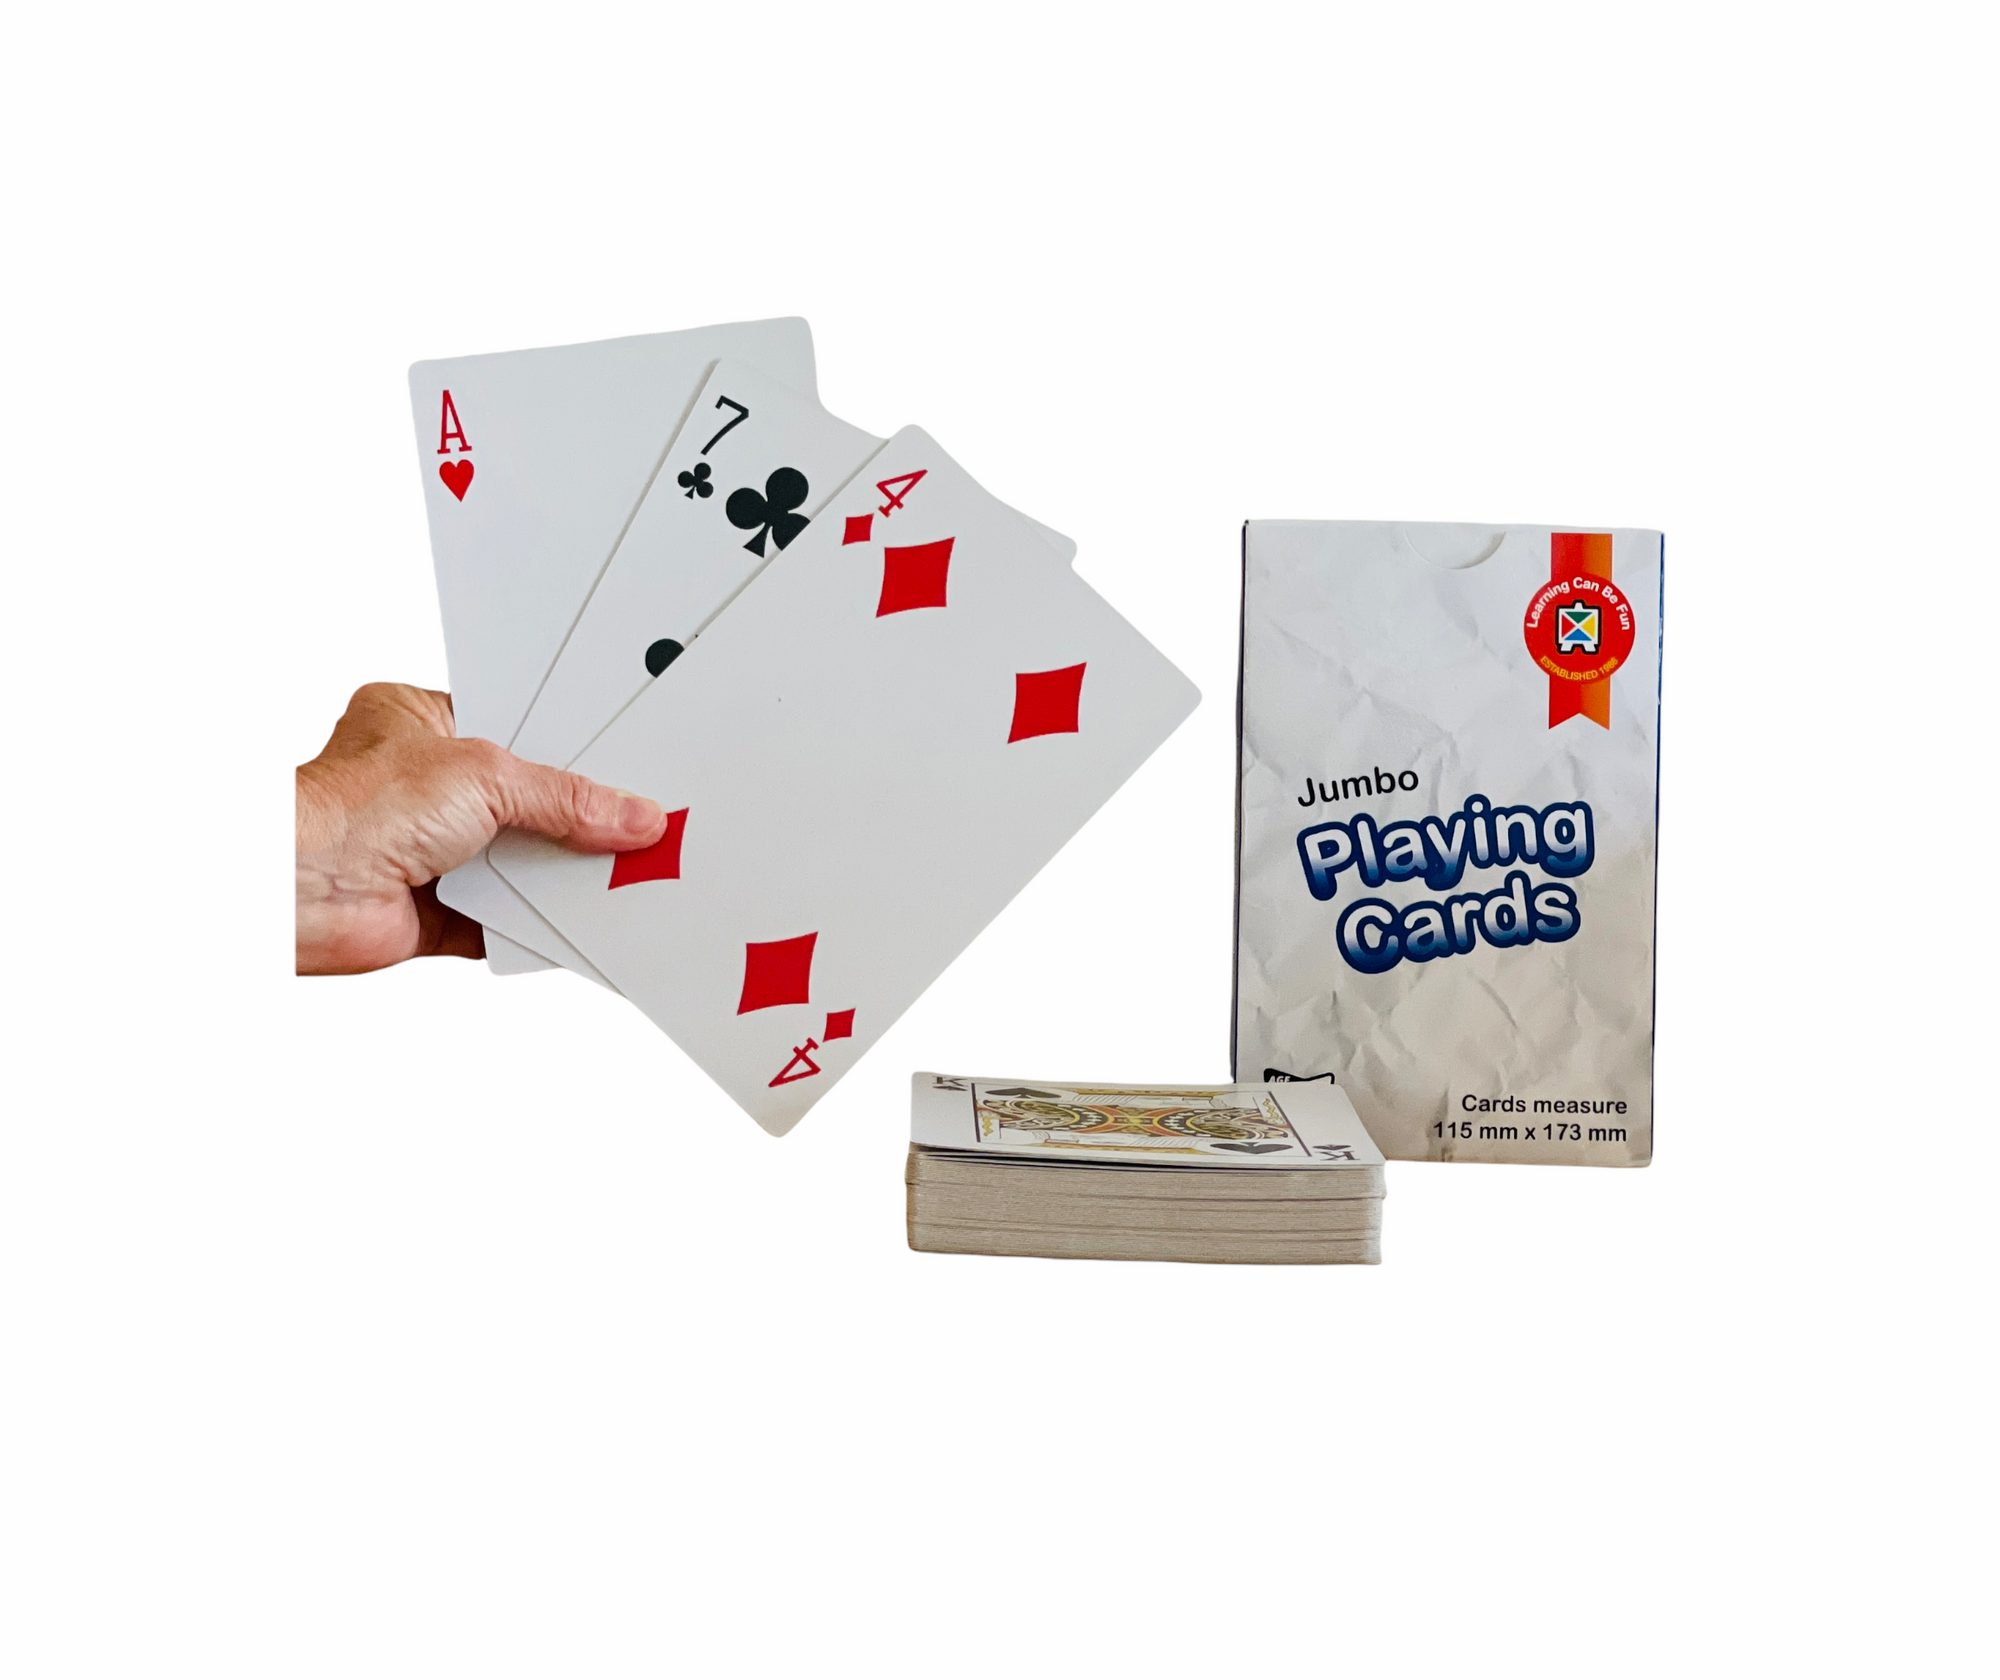 Hand holding Jumbo Playing Cards next to deck and packaging box on white background